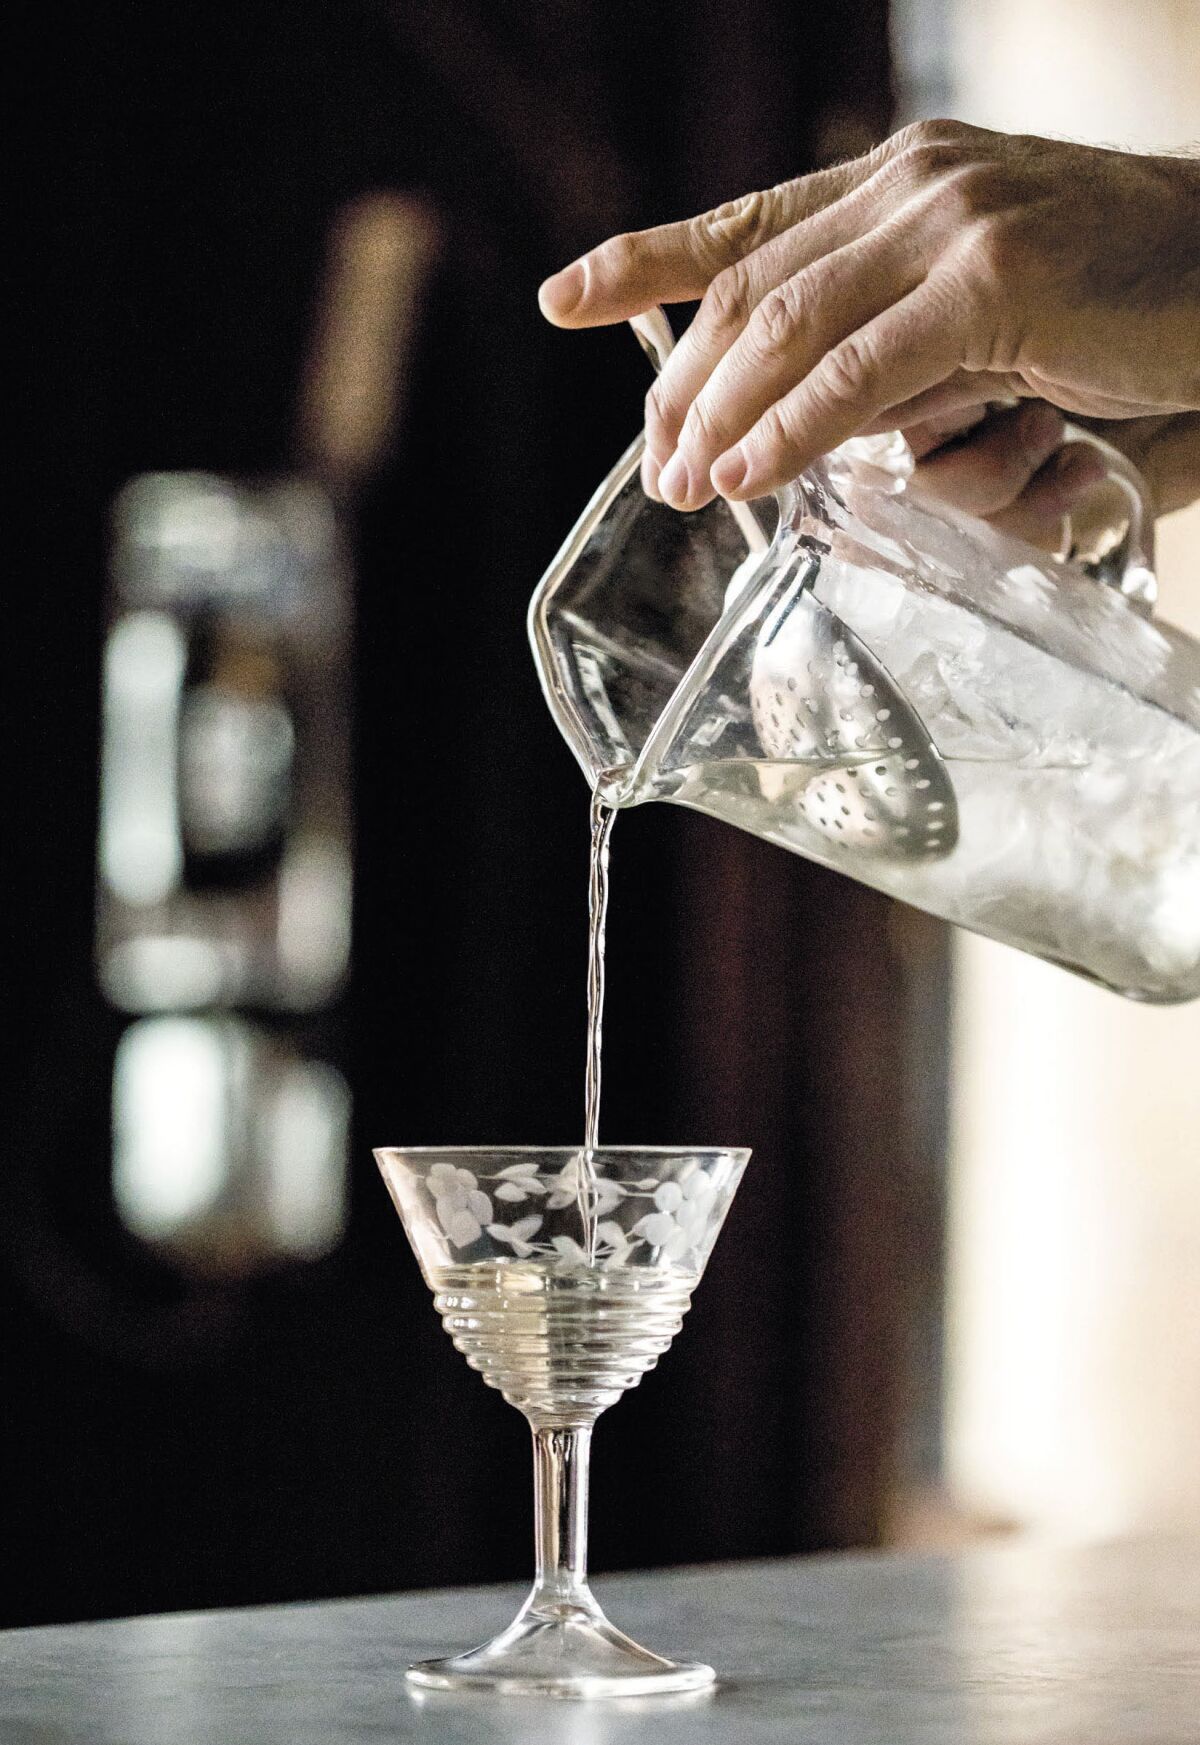 Pouring out a martini